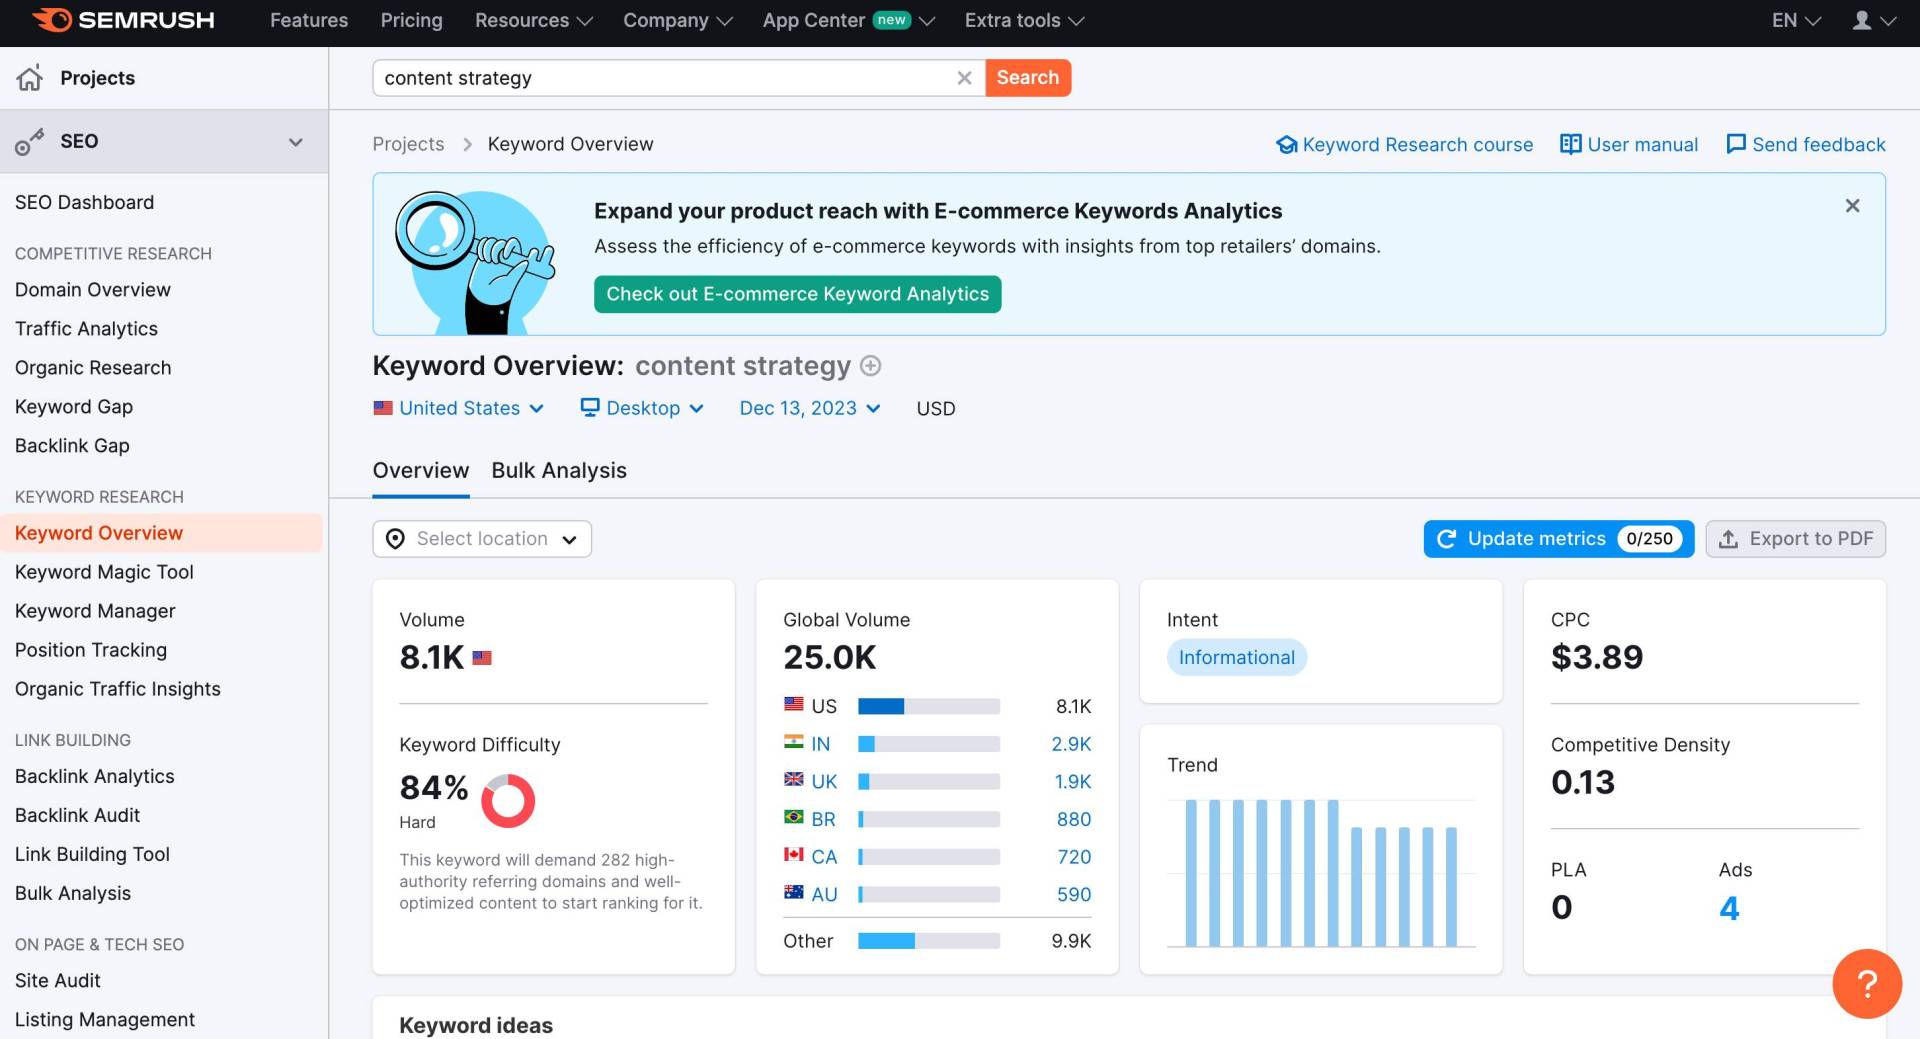 SEMrush example showing what data is needed to understand the content marketing process